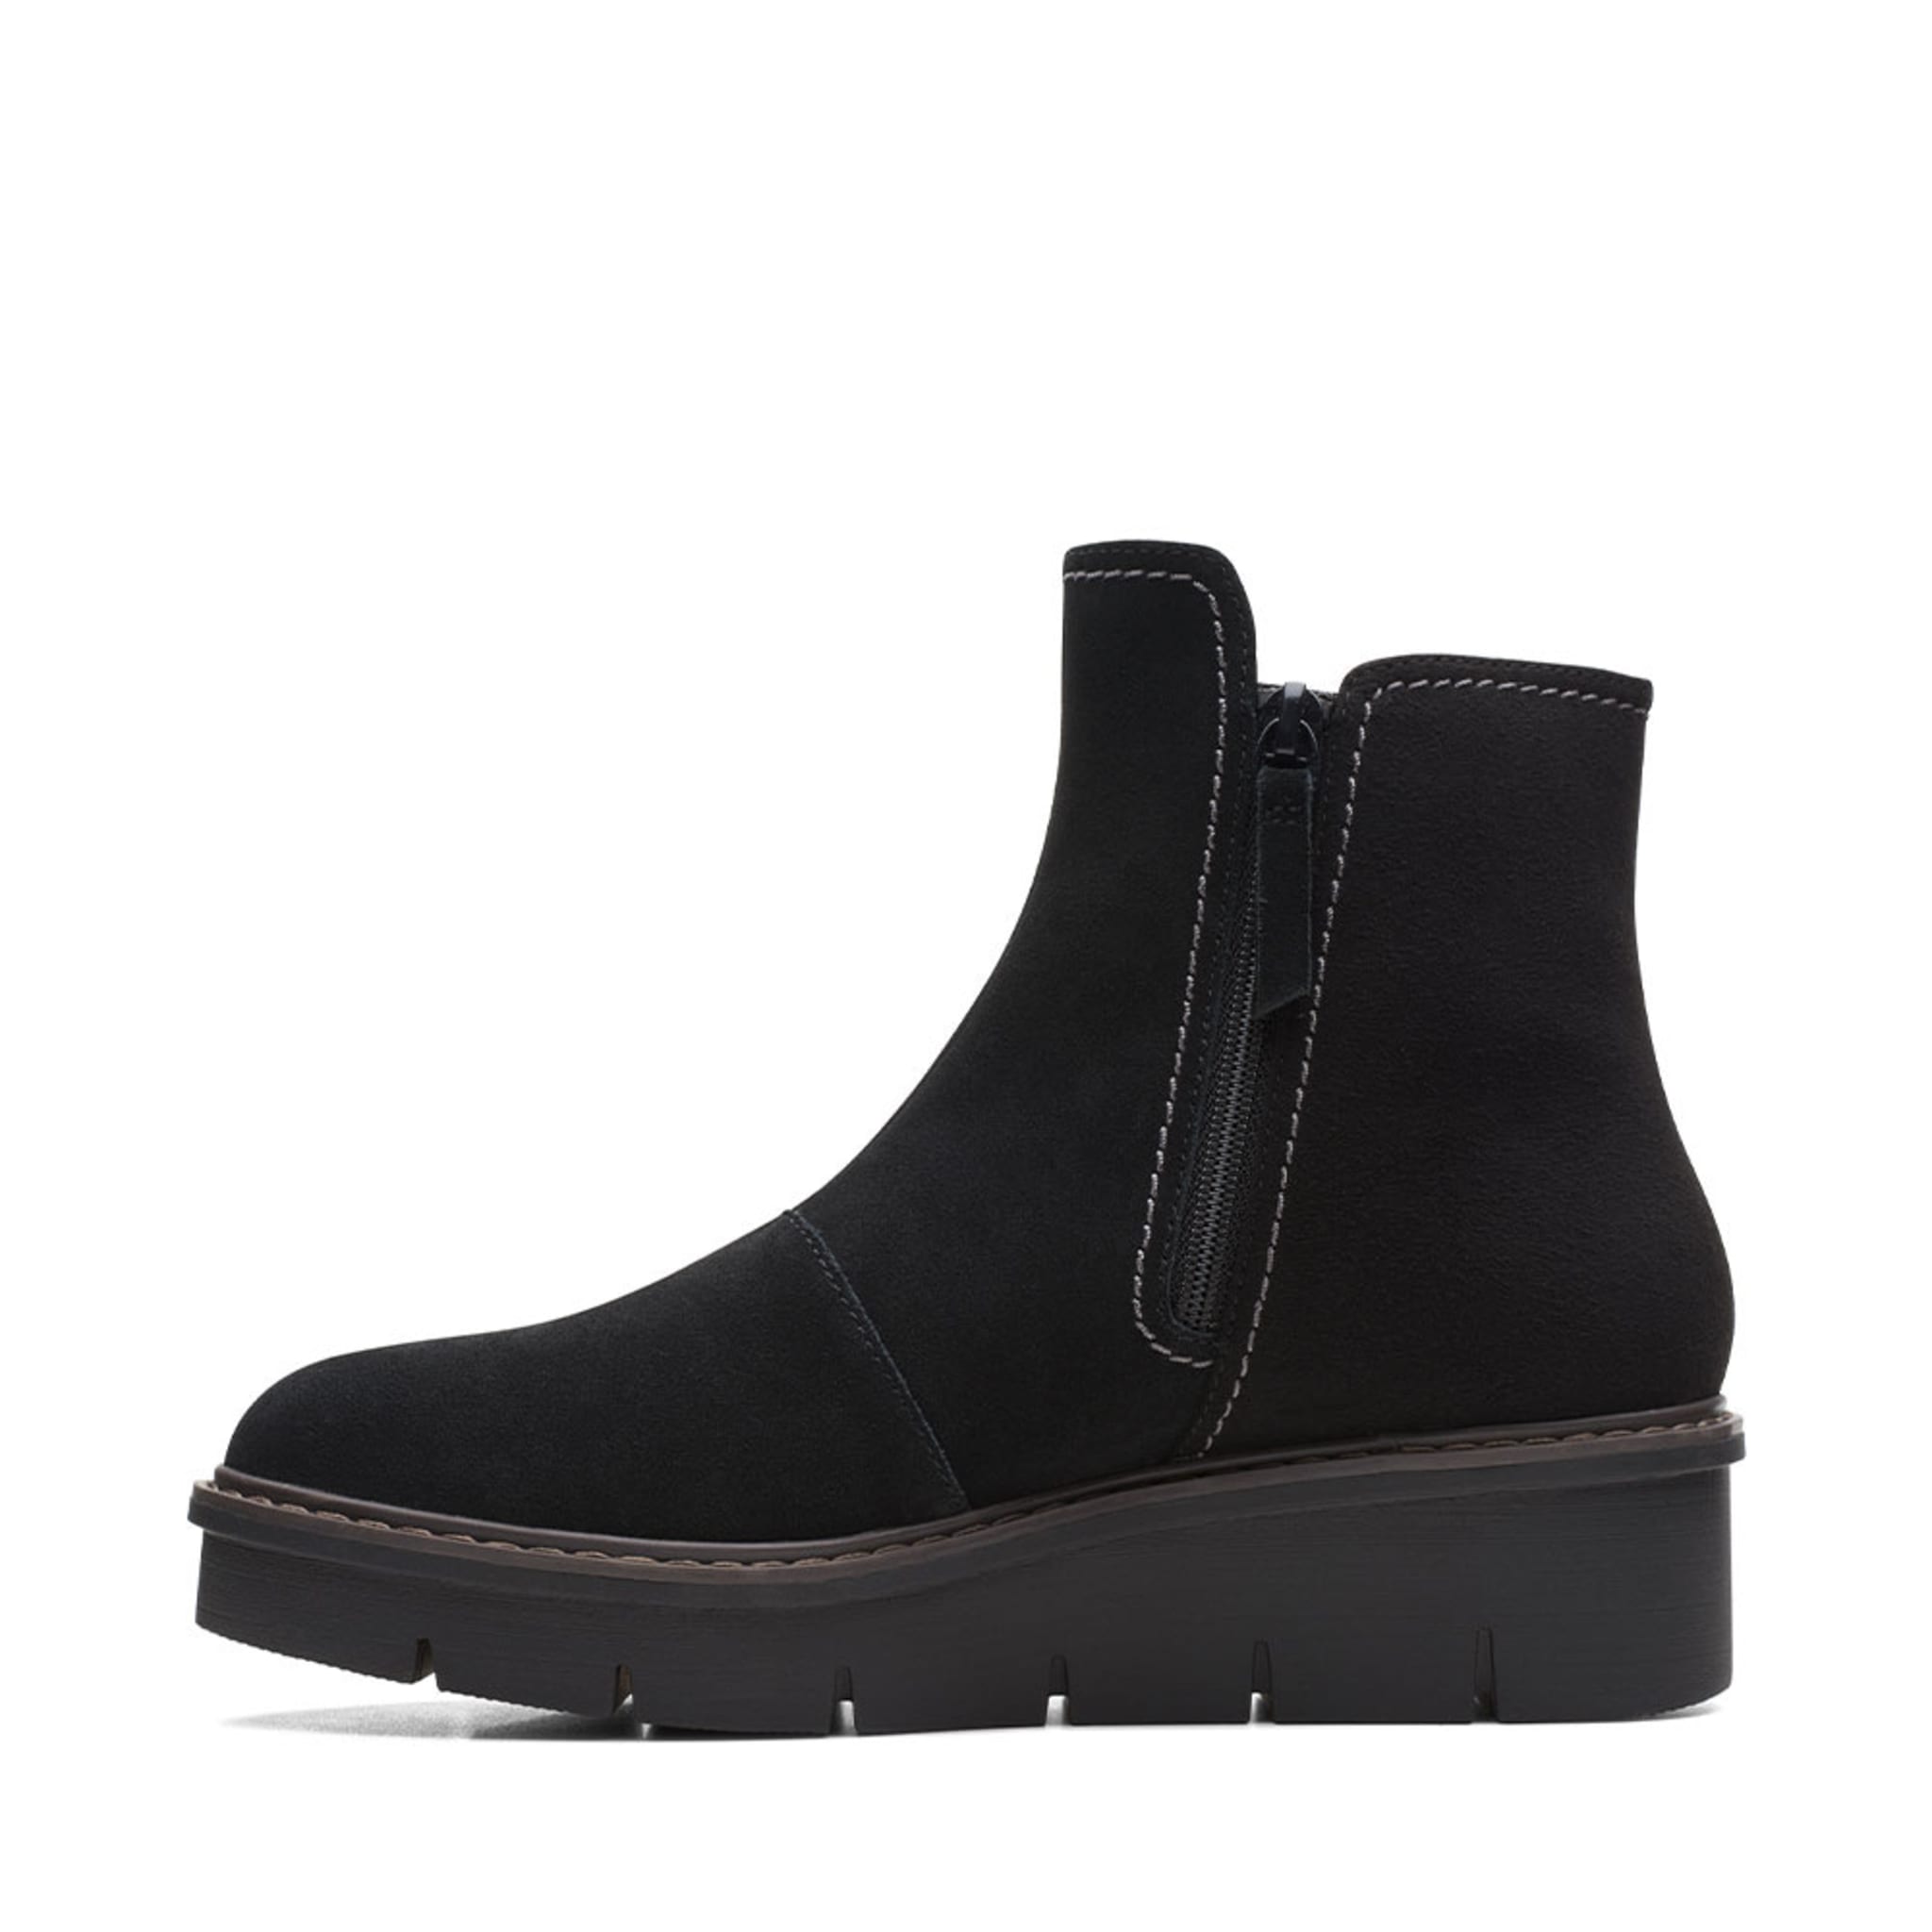 Airabell Move Boots, Black Suede